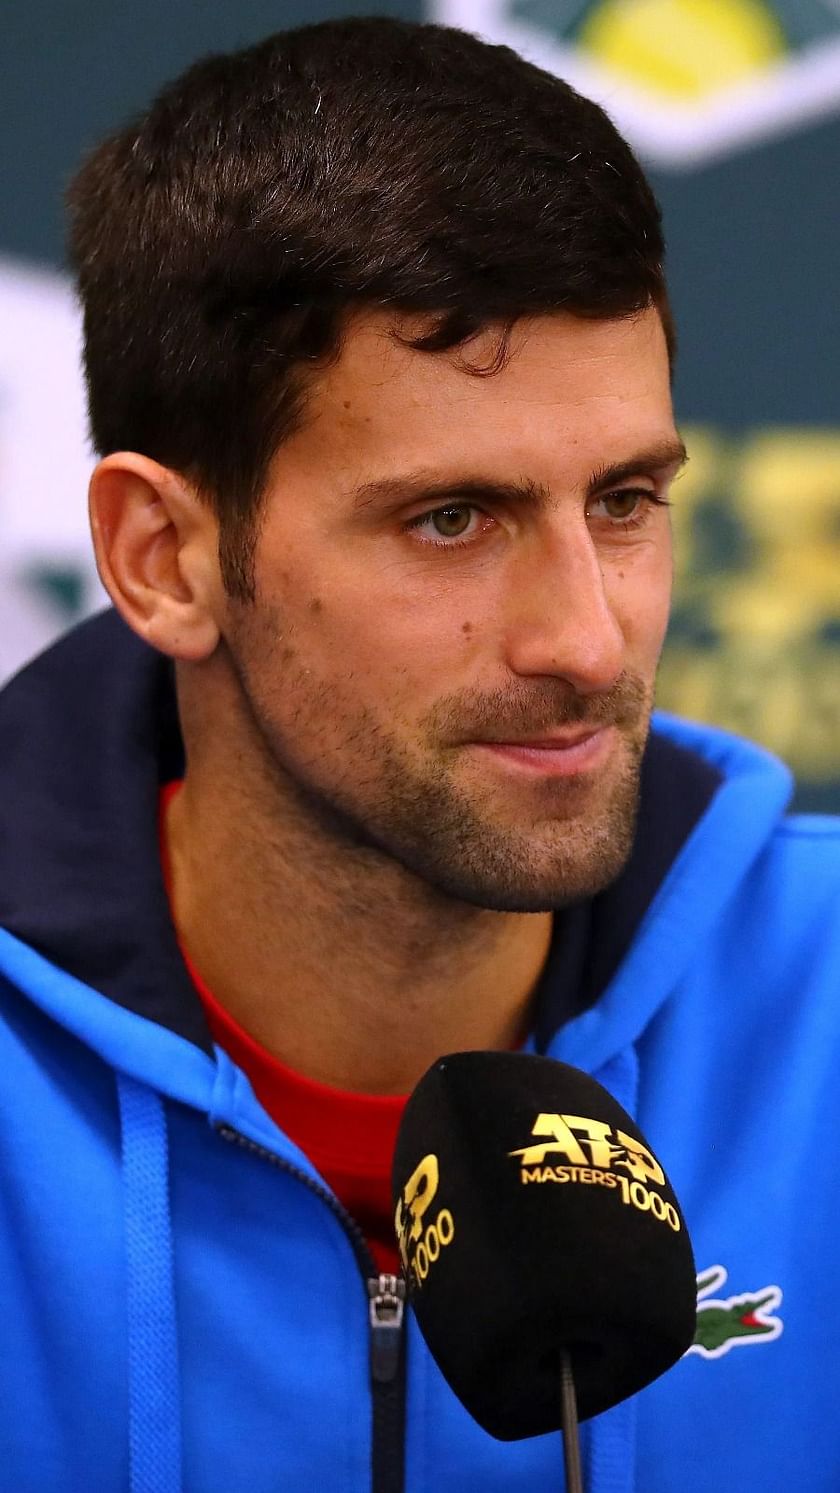 Djokovic Reminds Everyone In Turn And Around The World Who Is The